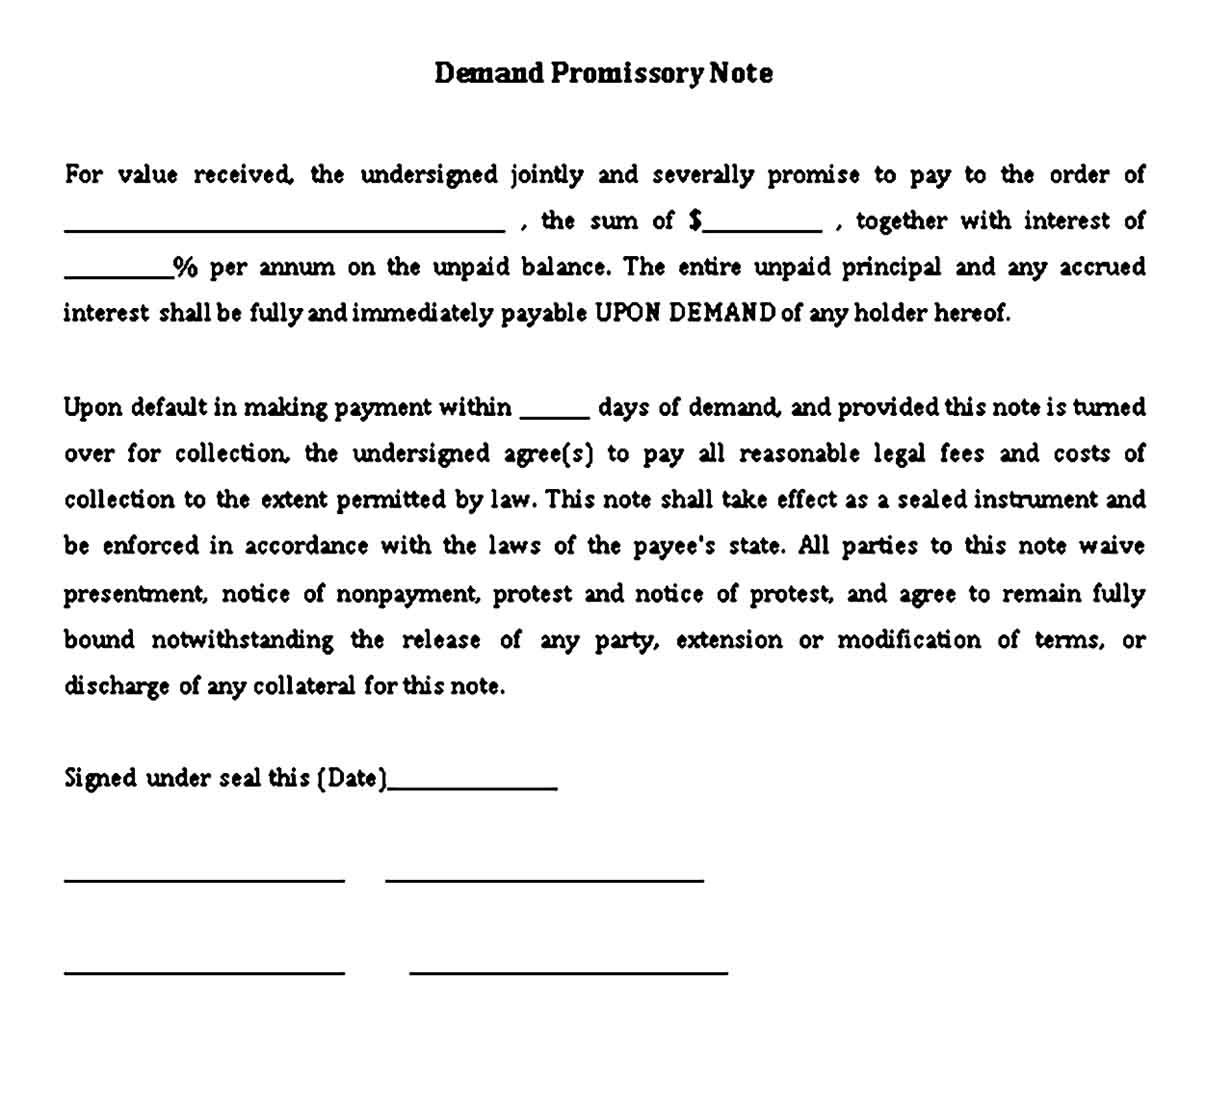 demand promissory note form